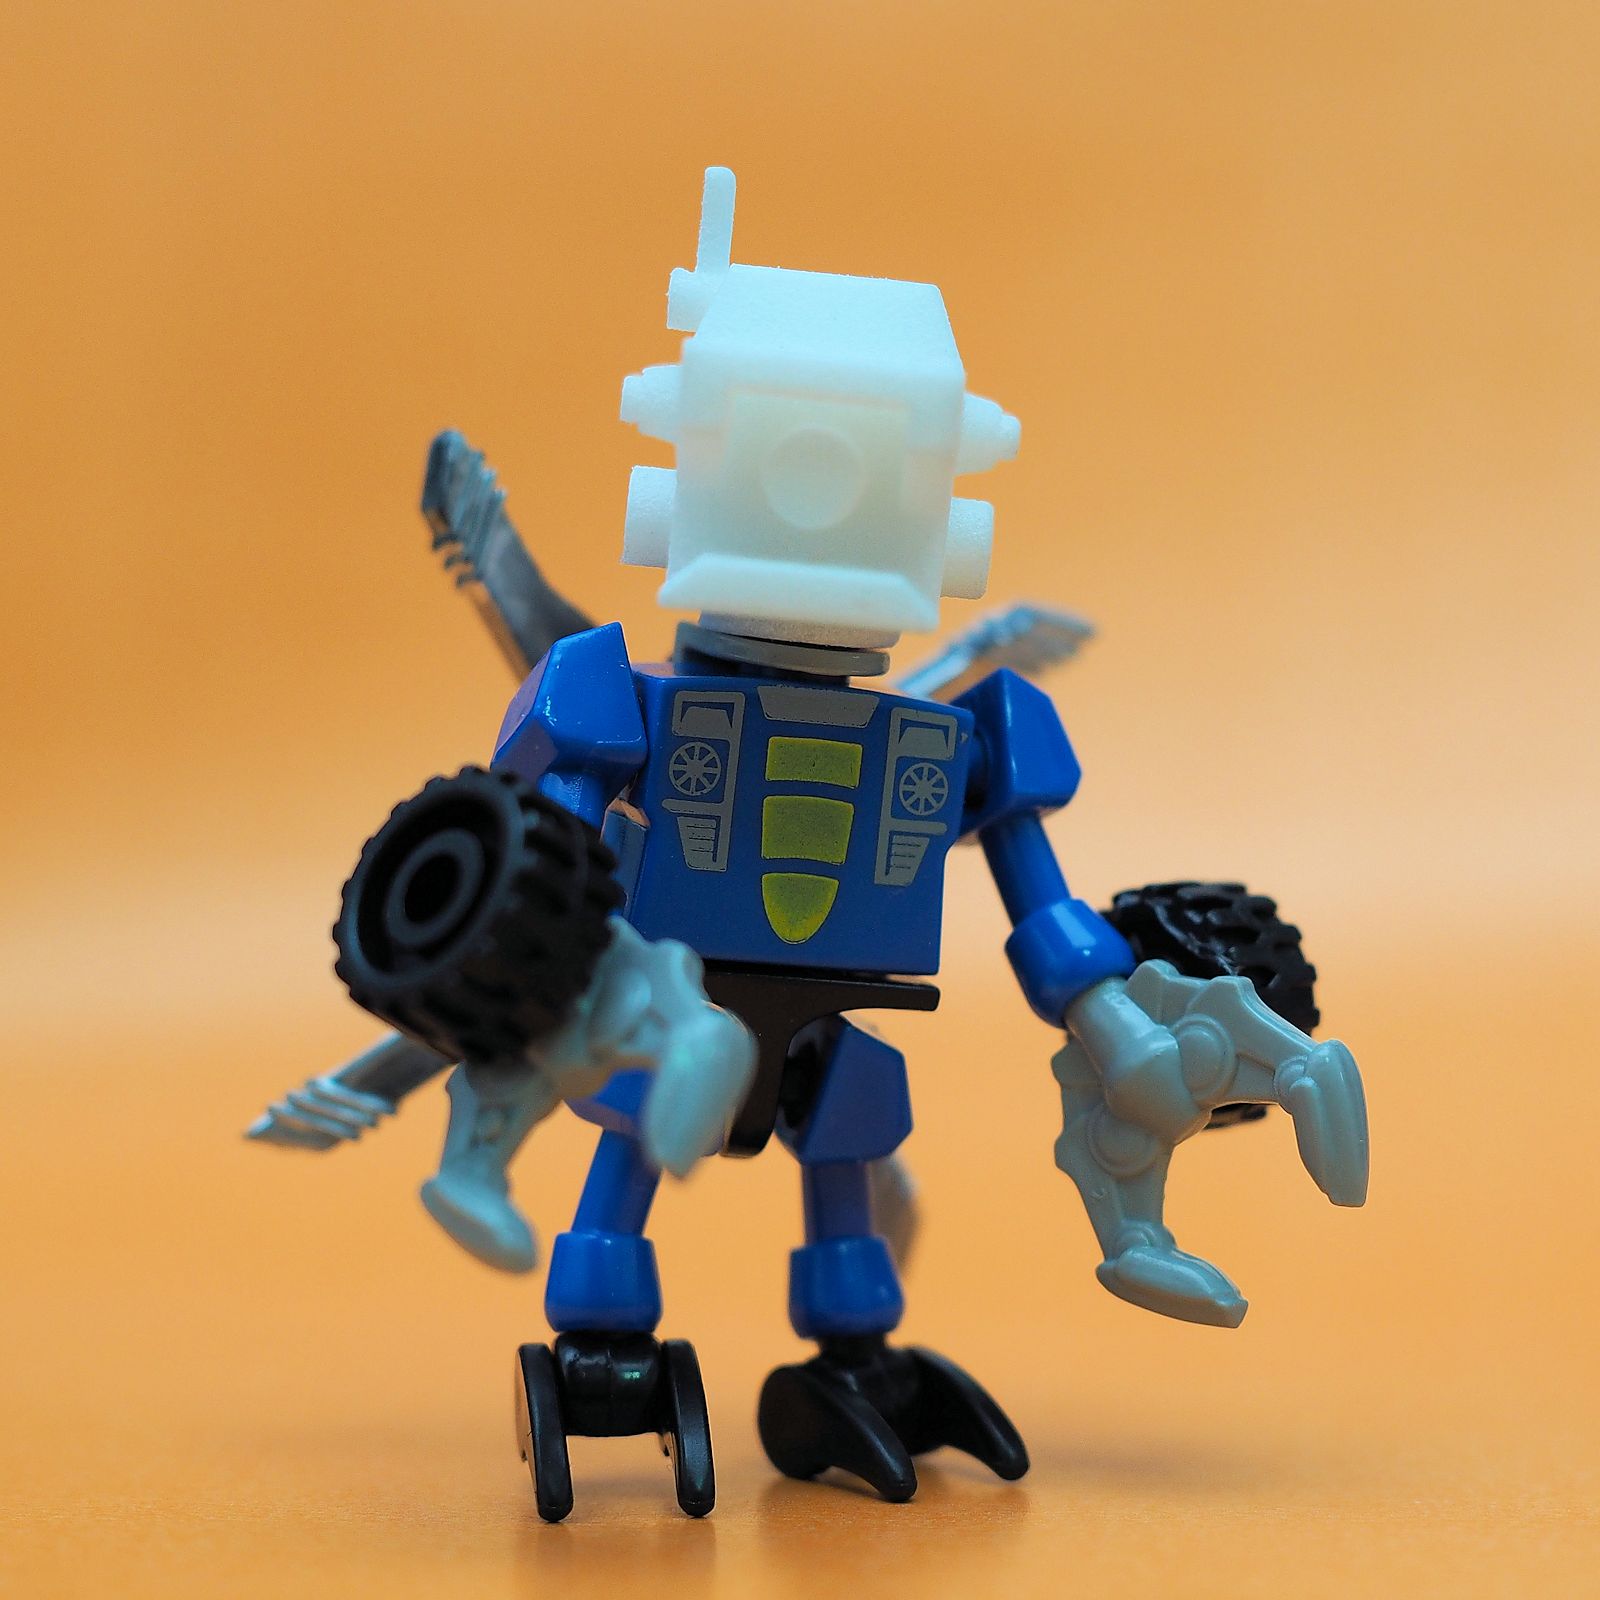 a blue lego figure holding an electrical device